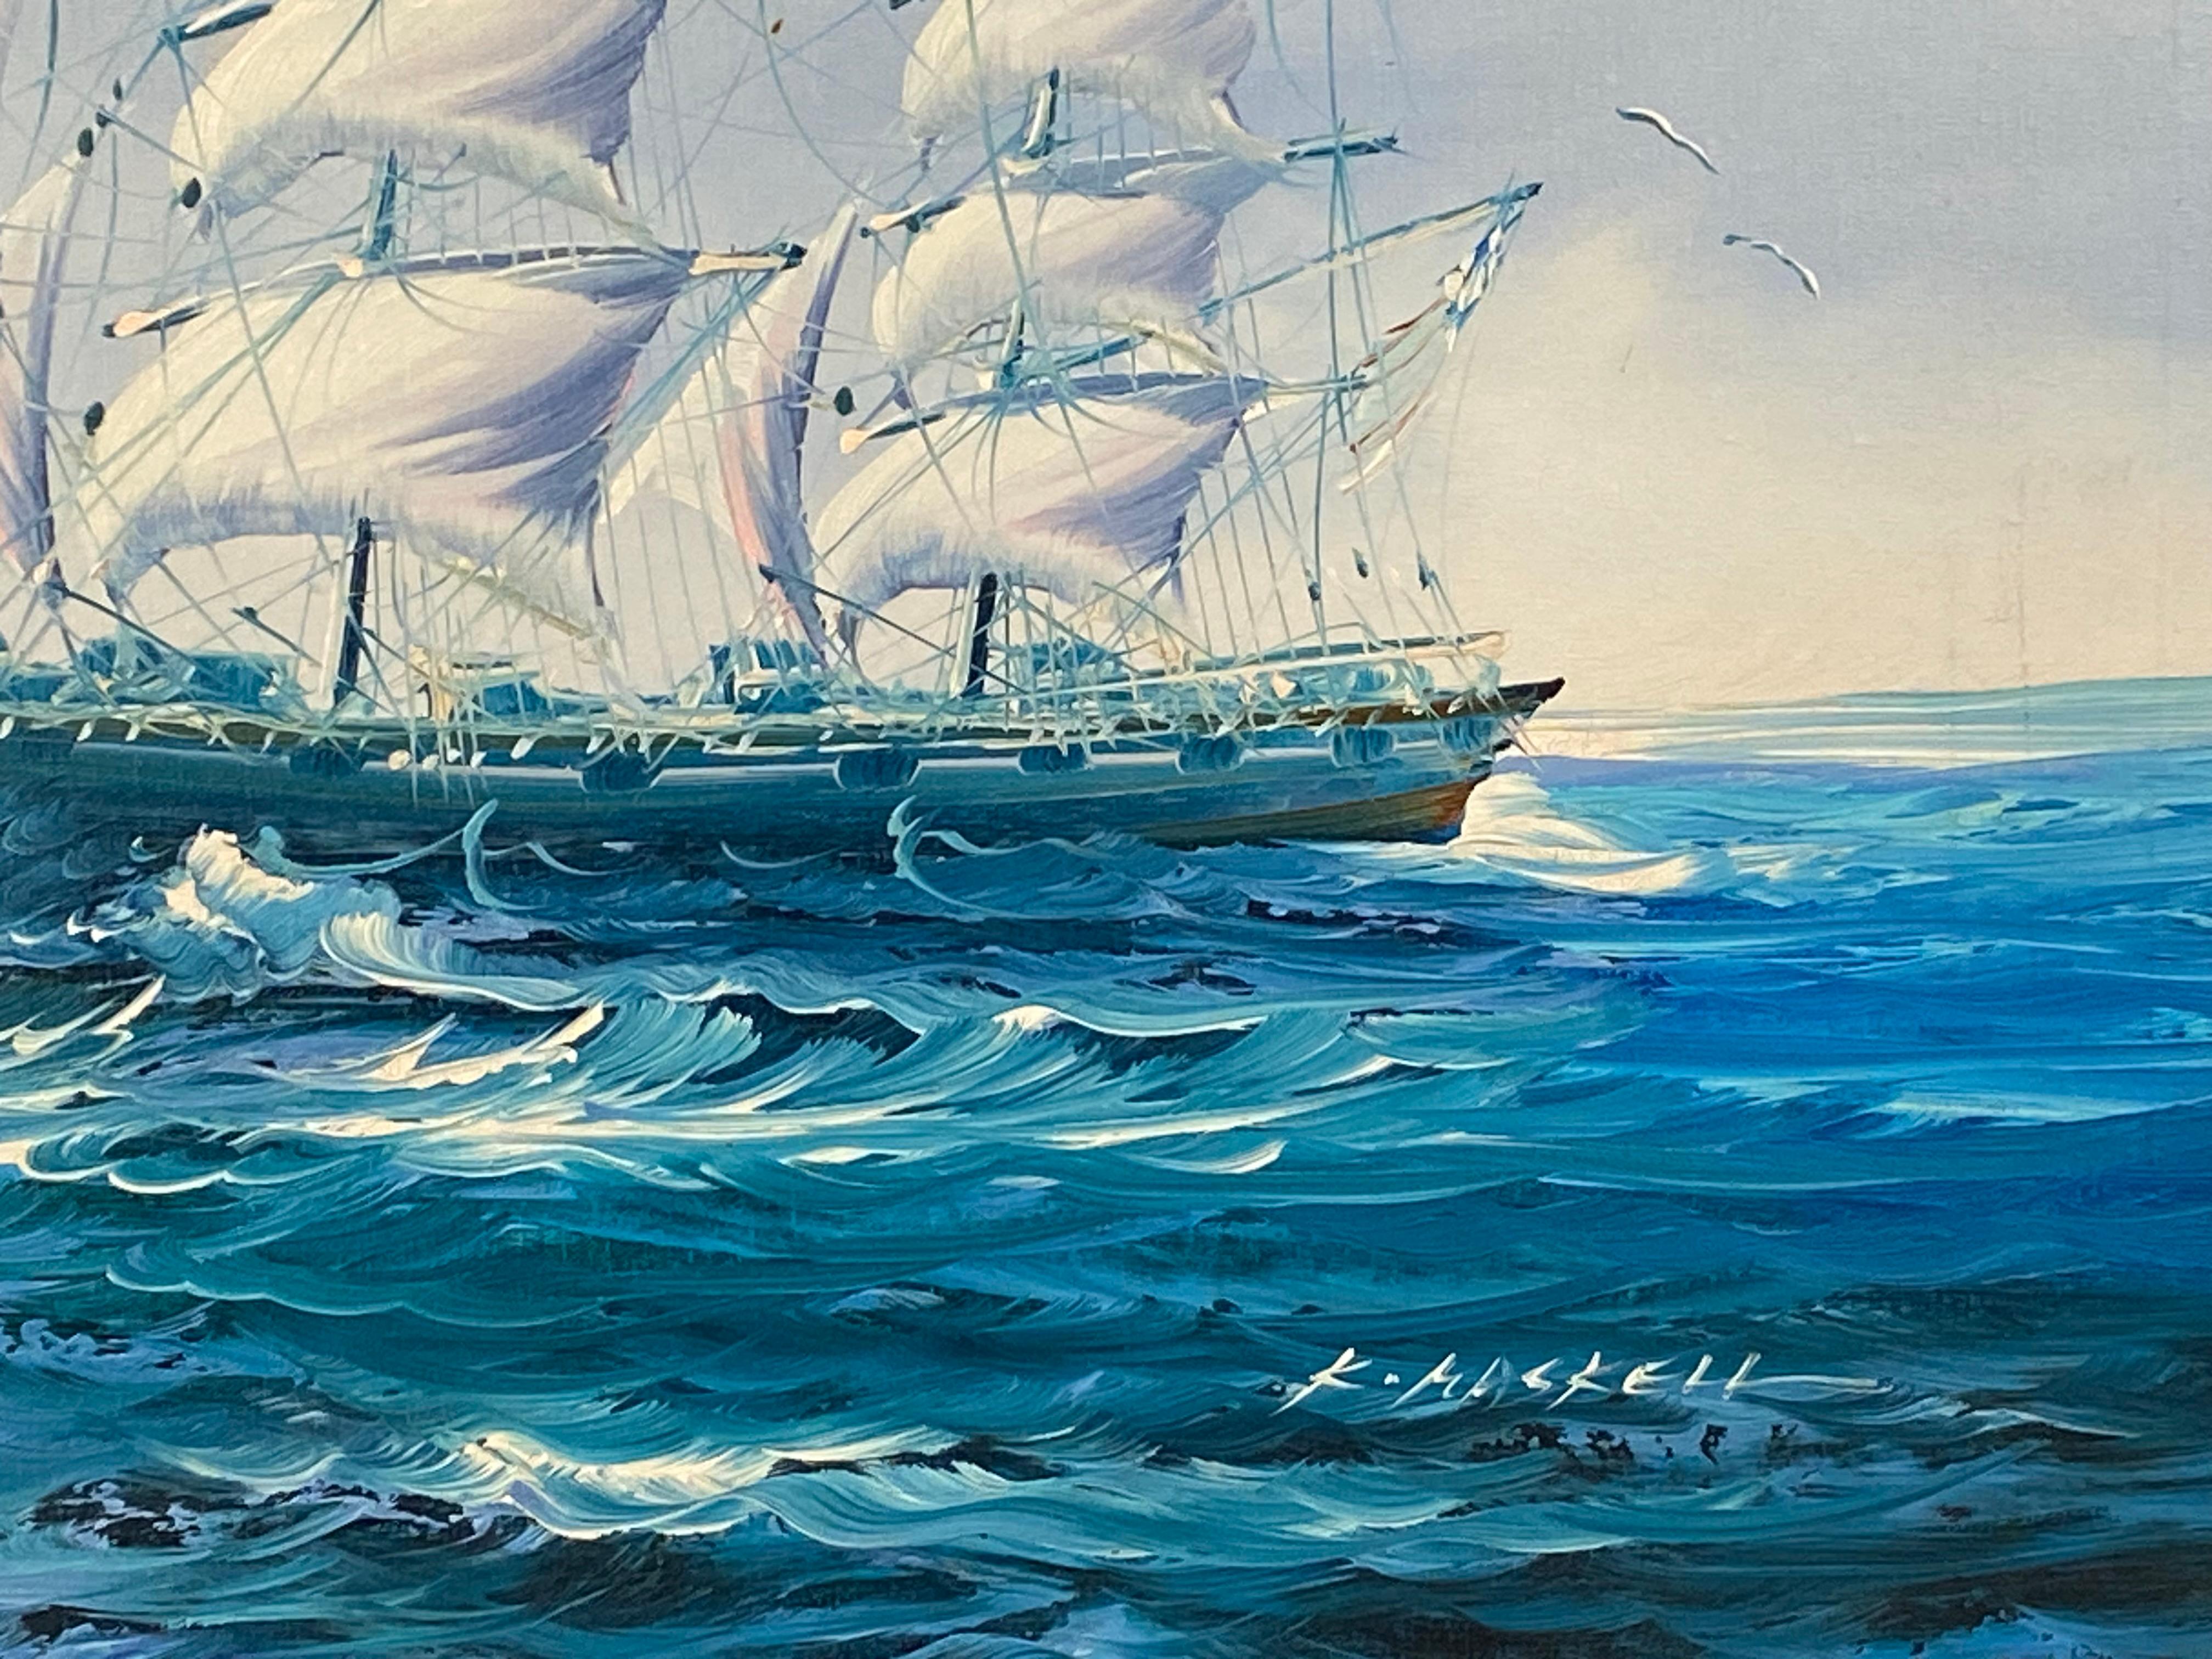 Original oil on canvas painting of a three mast clipper under full sail. Signed by the artist lower right. Condition is very good to excellent. Mild stretcher bar wear top. Circa 1980. The painting is housed in a solid oak wood frame in walnut